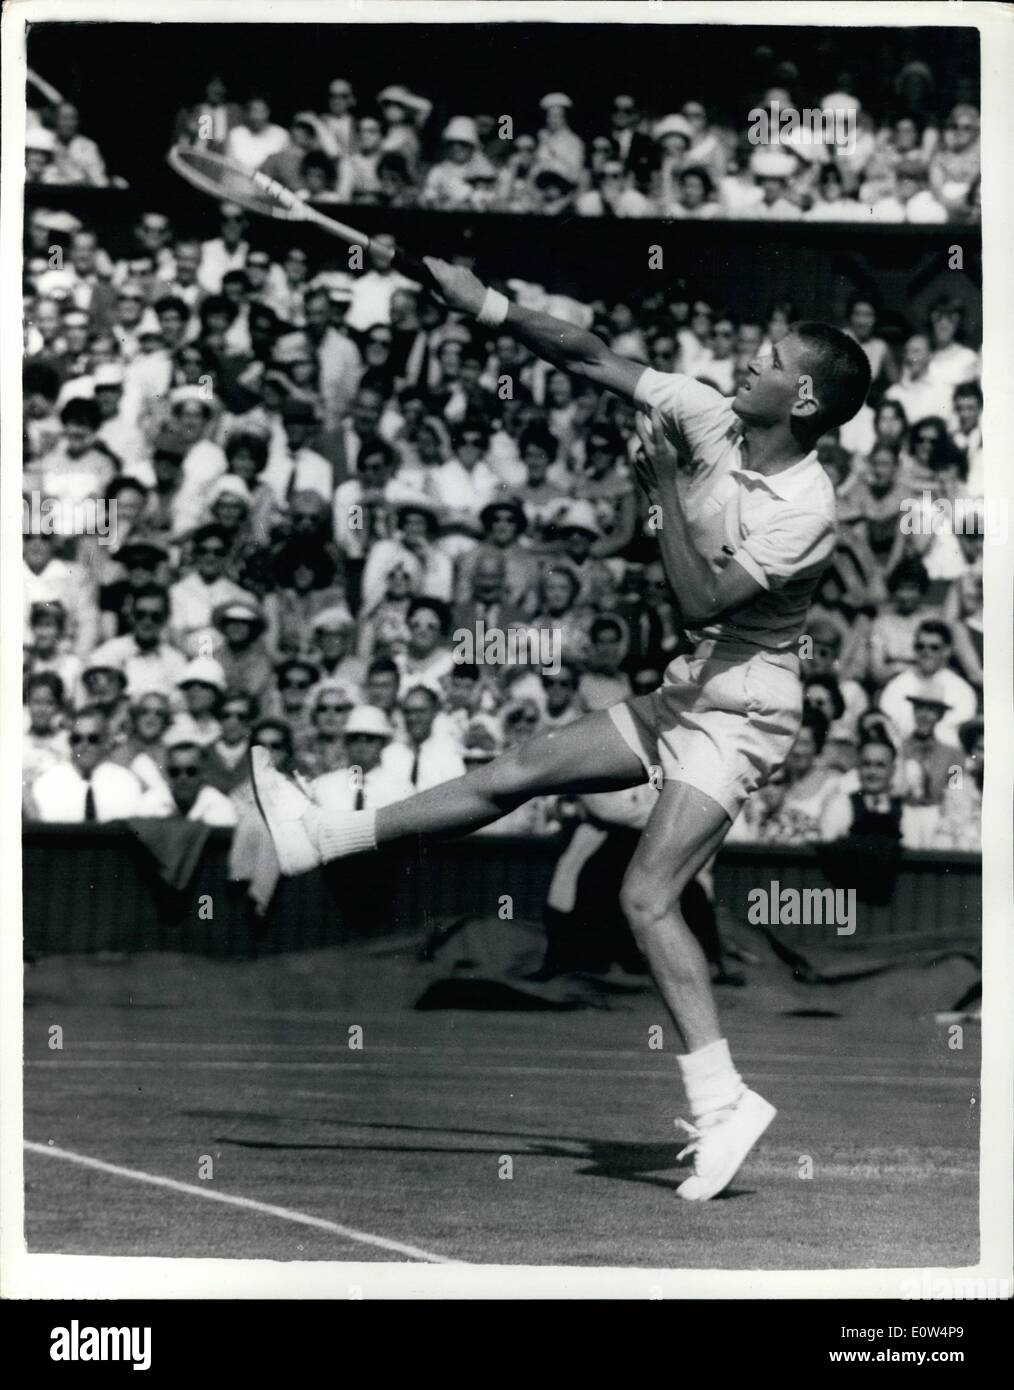 Jun. 06, 1961 - TENNIS CHAMPIONSHIPS AT WIMBLEDON - THIRD DAY. PHOTO SHOWS: R.D. RALSTON, USA, in play against J. LINDQUIST, Sweden. Ralston four after a hard-fought four-set struggle-the last set was 16-14. Stock Photo